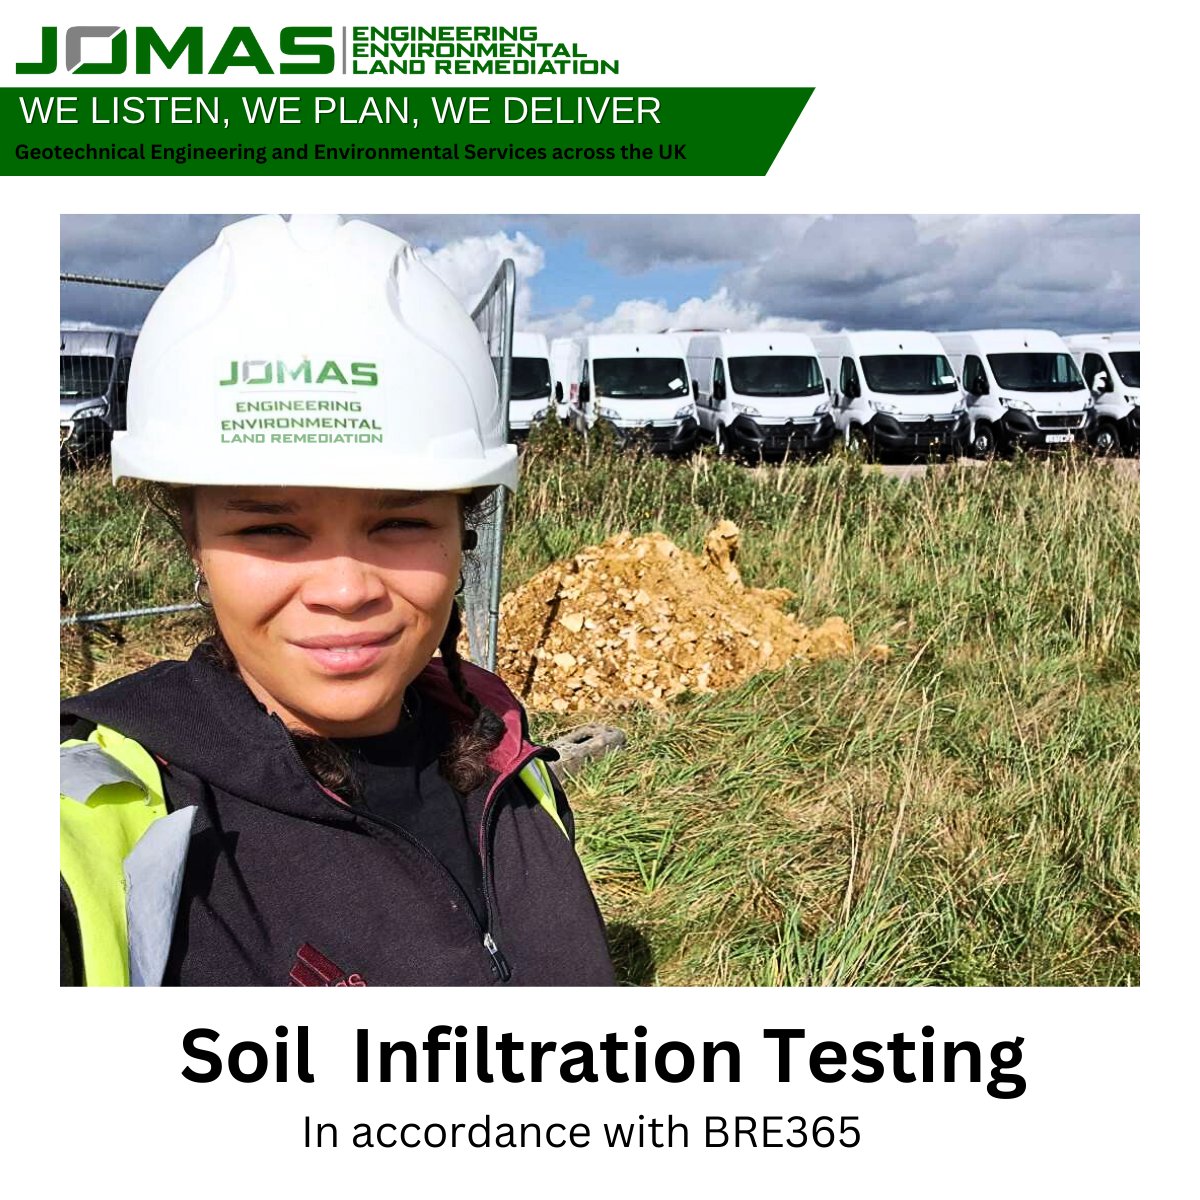 Our Engineer Joanna is carrying out #soilinfiltrationtesting in accordance with BRE365. Work was spec'd by the clients' drainage engineer, ahead of a new road being built. We'll provide infiltration rates of the soil and if suitable, the drainage engineer will design #soakaways.